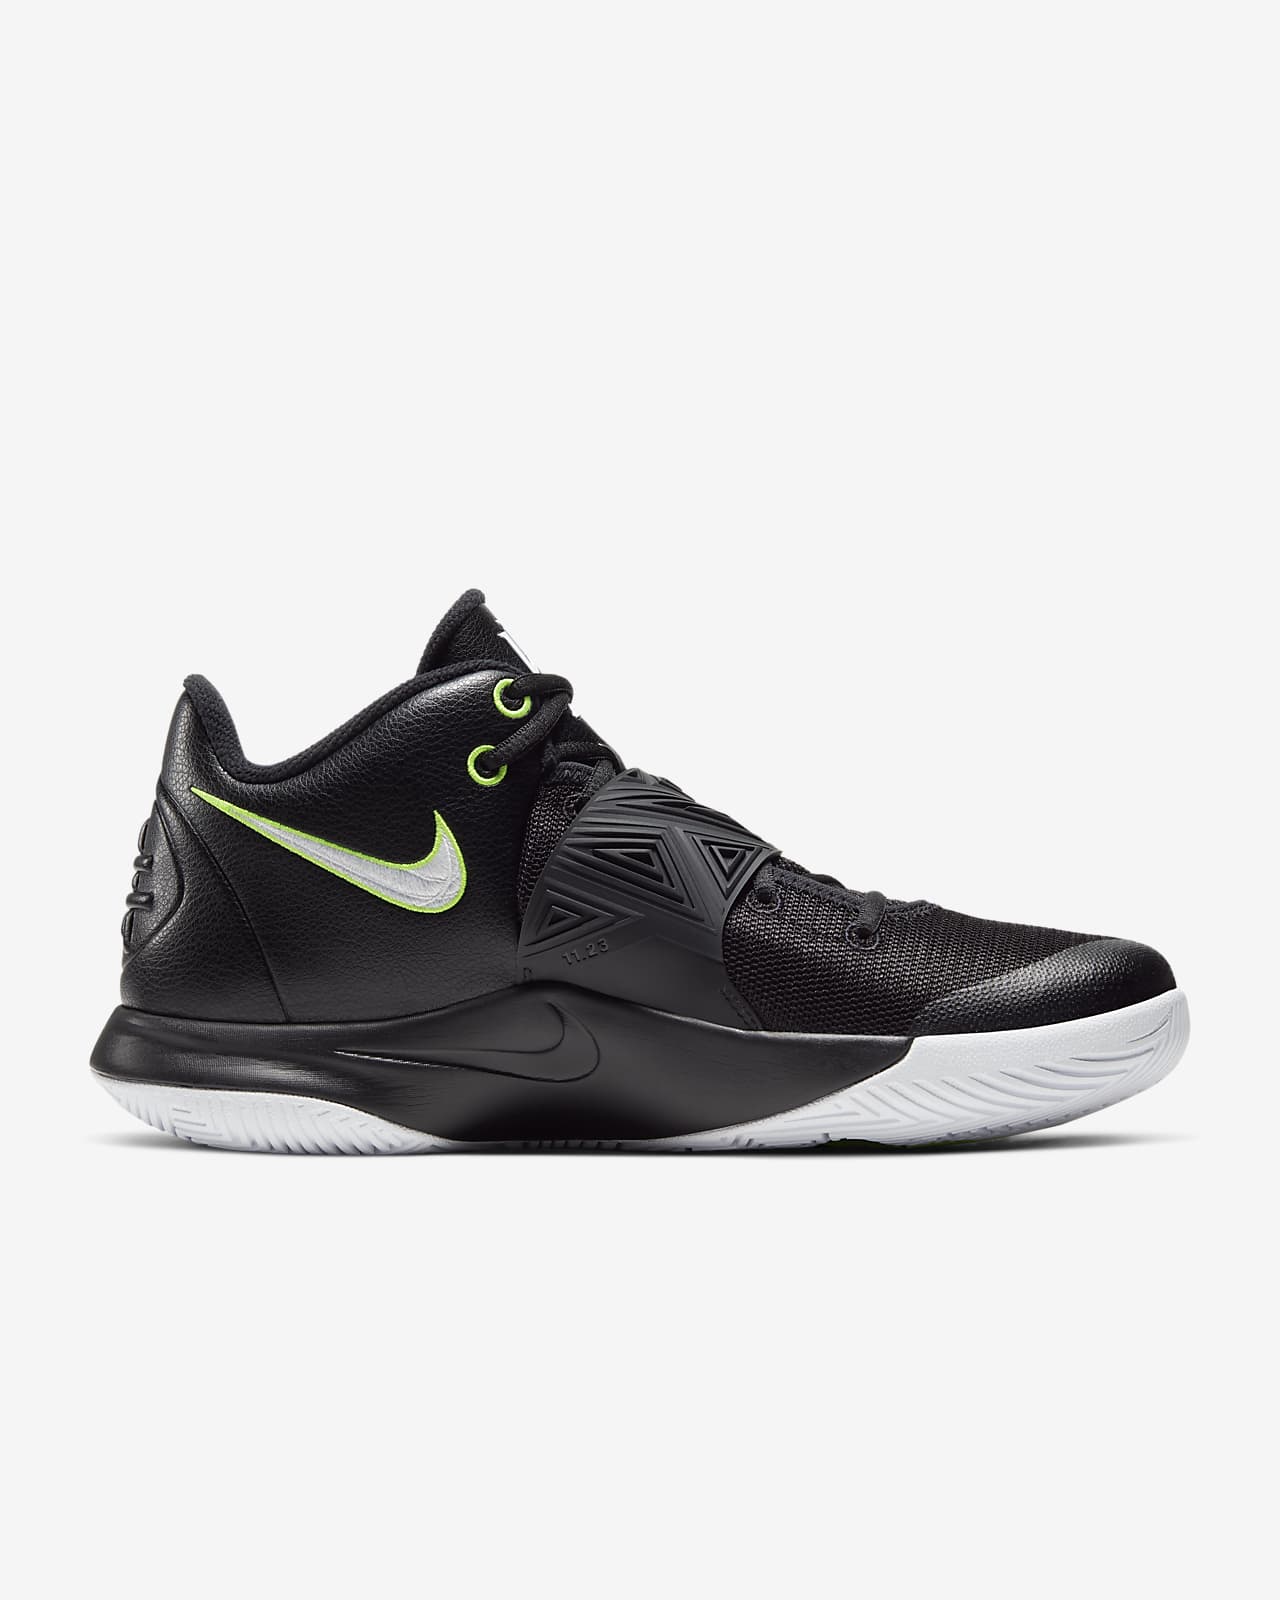 kyrie irving shoes flytrap 3